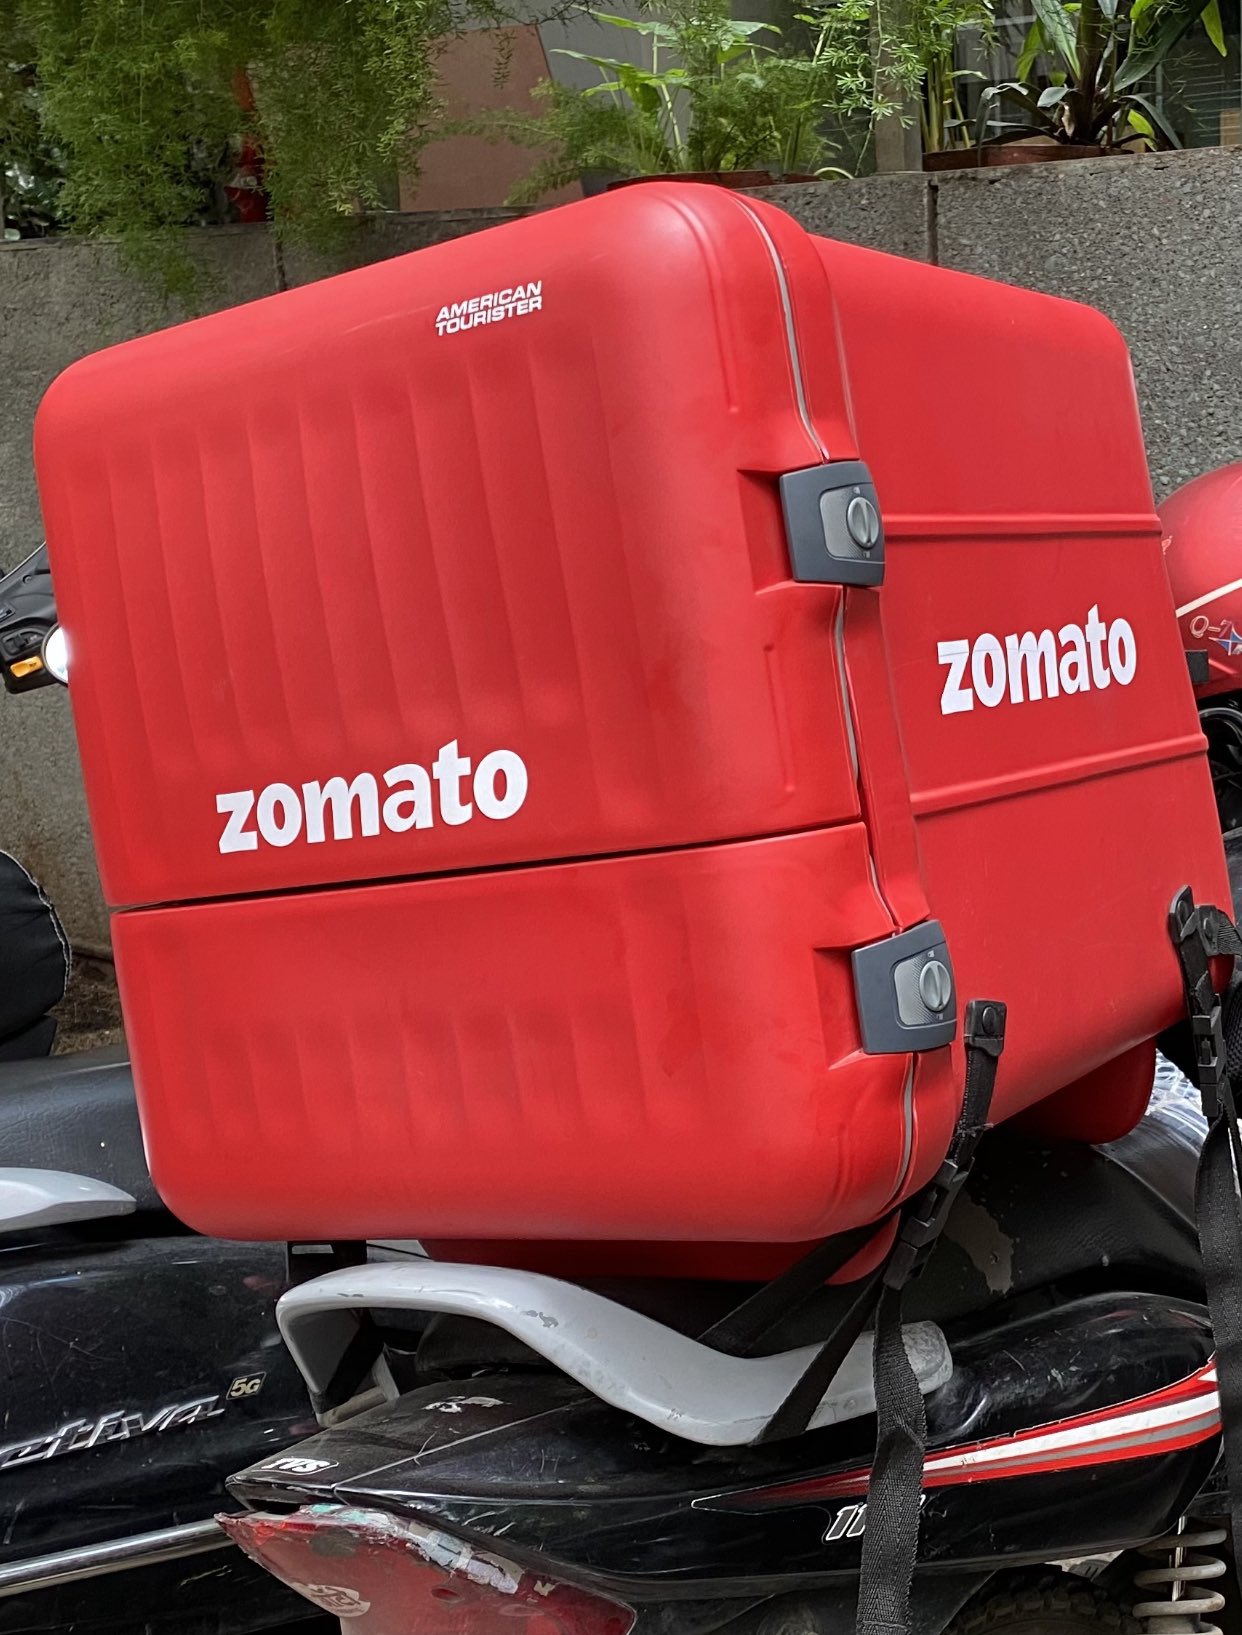 Zomato Bags and T-shirt Unboxing | how to get Zomato bag and t-shirt |  Kanpur Boys - YouTube